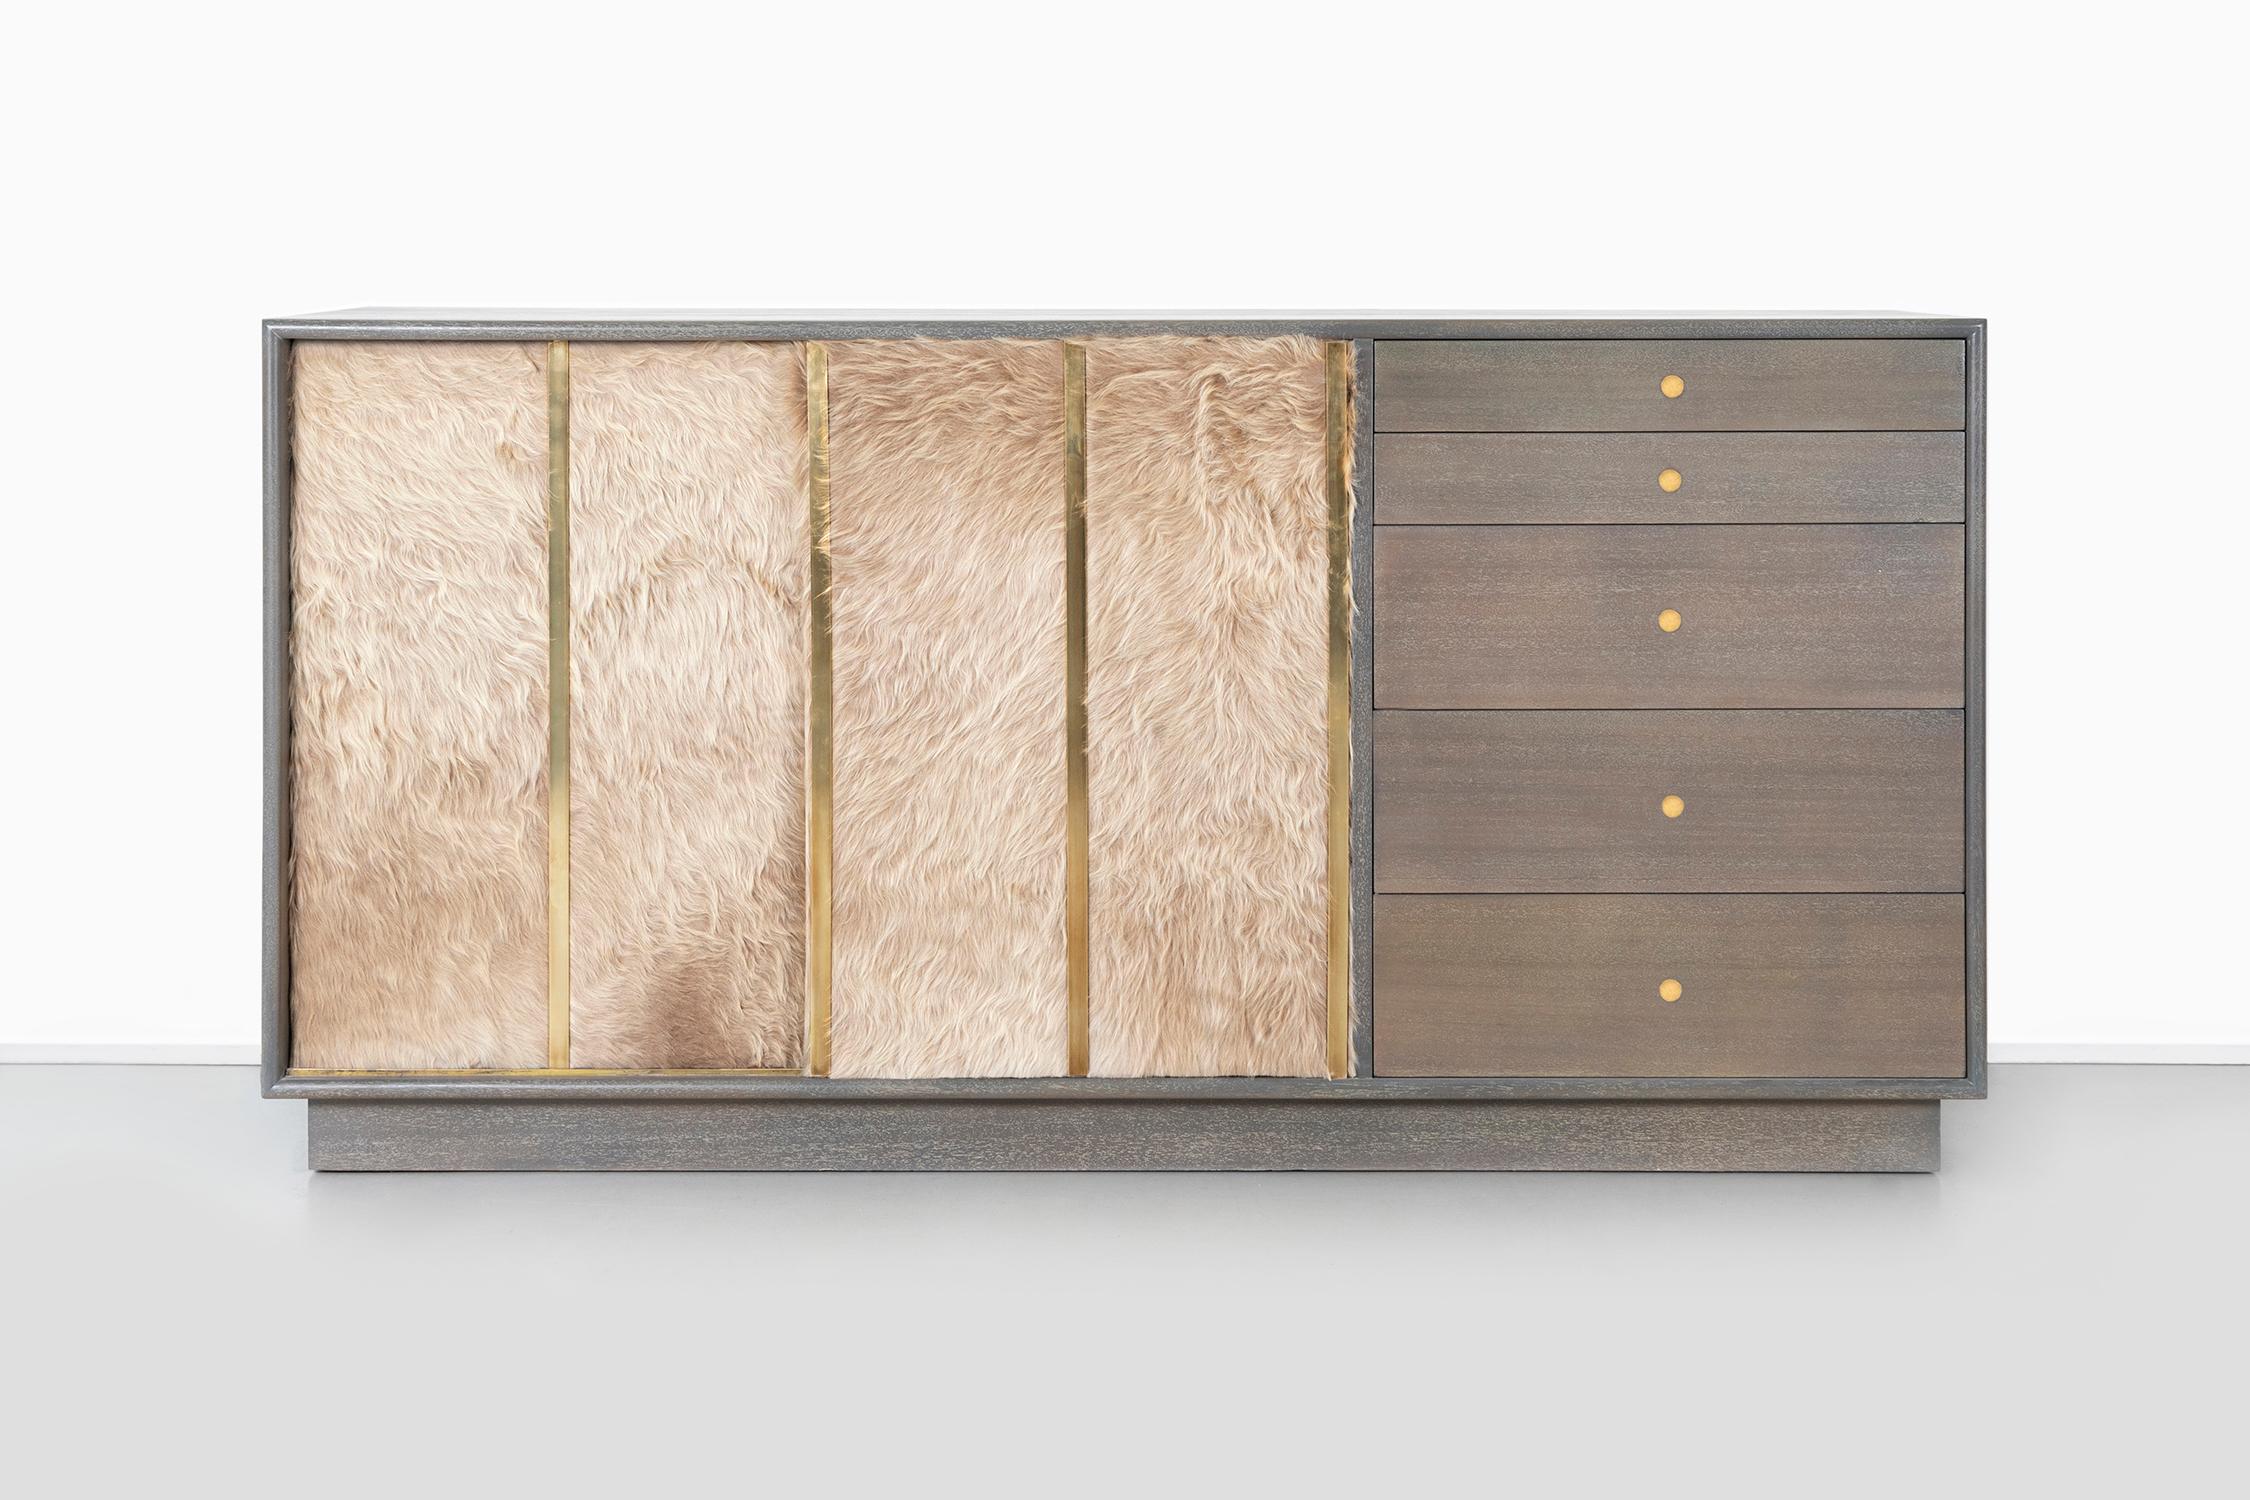 Credenza

Designed by Harvey Probber

USA, circa 1950s

Mahogany, brass and Brazilian cowhide

Measures: 32 ½” H x 65 ¼” W x 18” D

Manufacturer’s label on right side of top drawer.